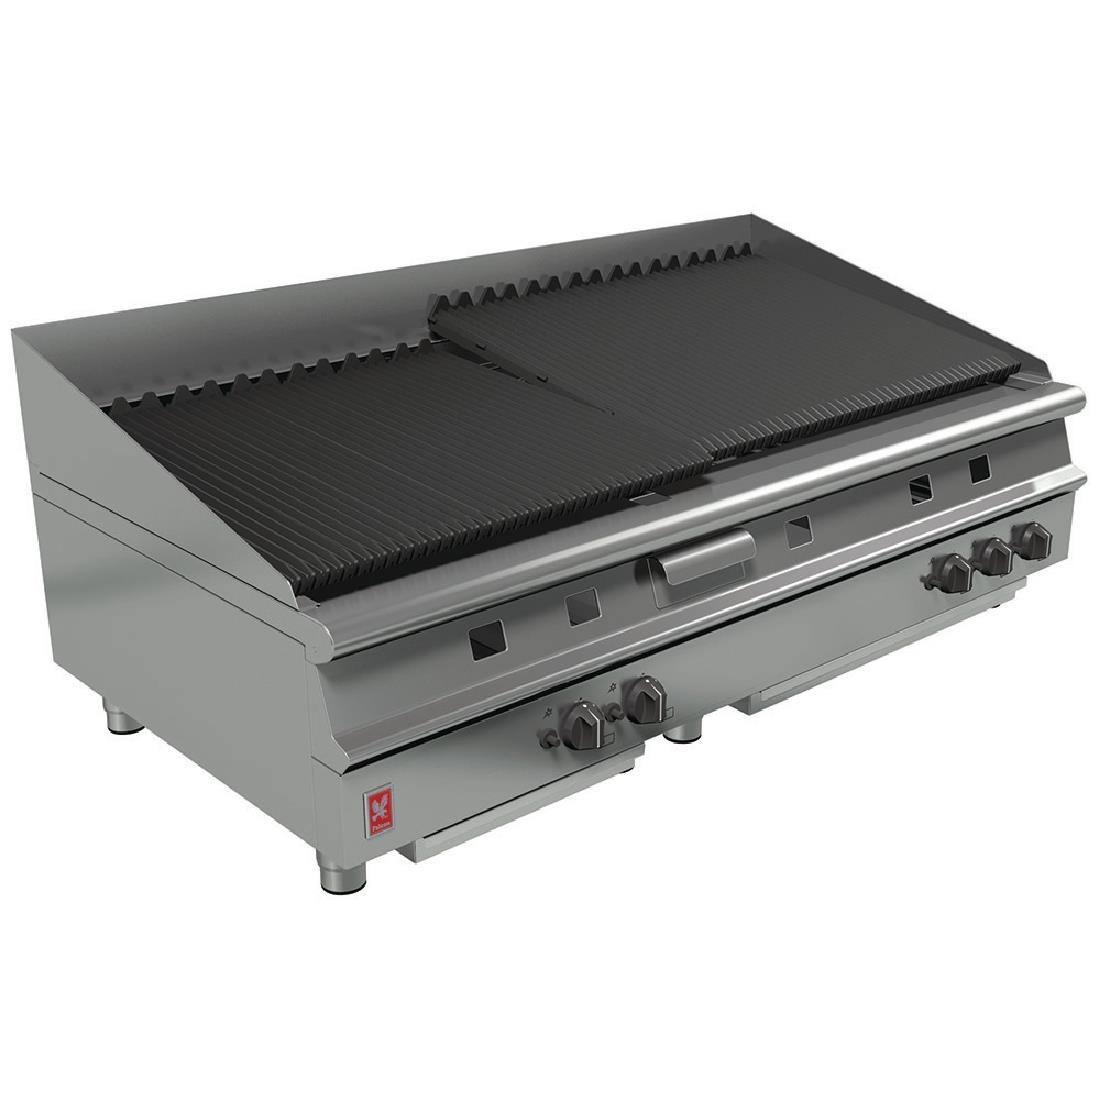 Falcon Dominator Plus Natural Gas Chargrill G31525 - GP032-N  - 1